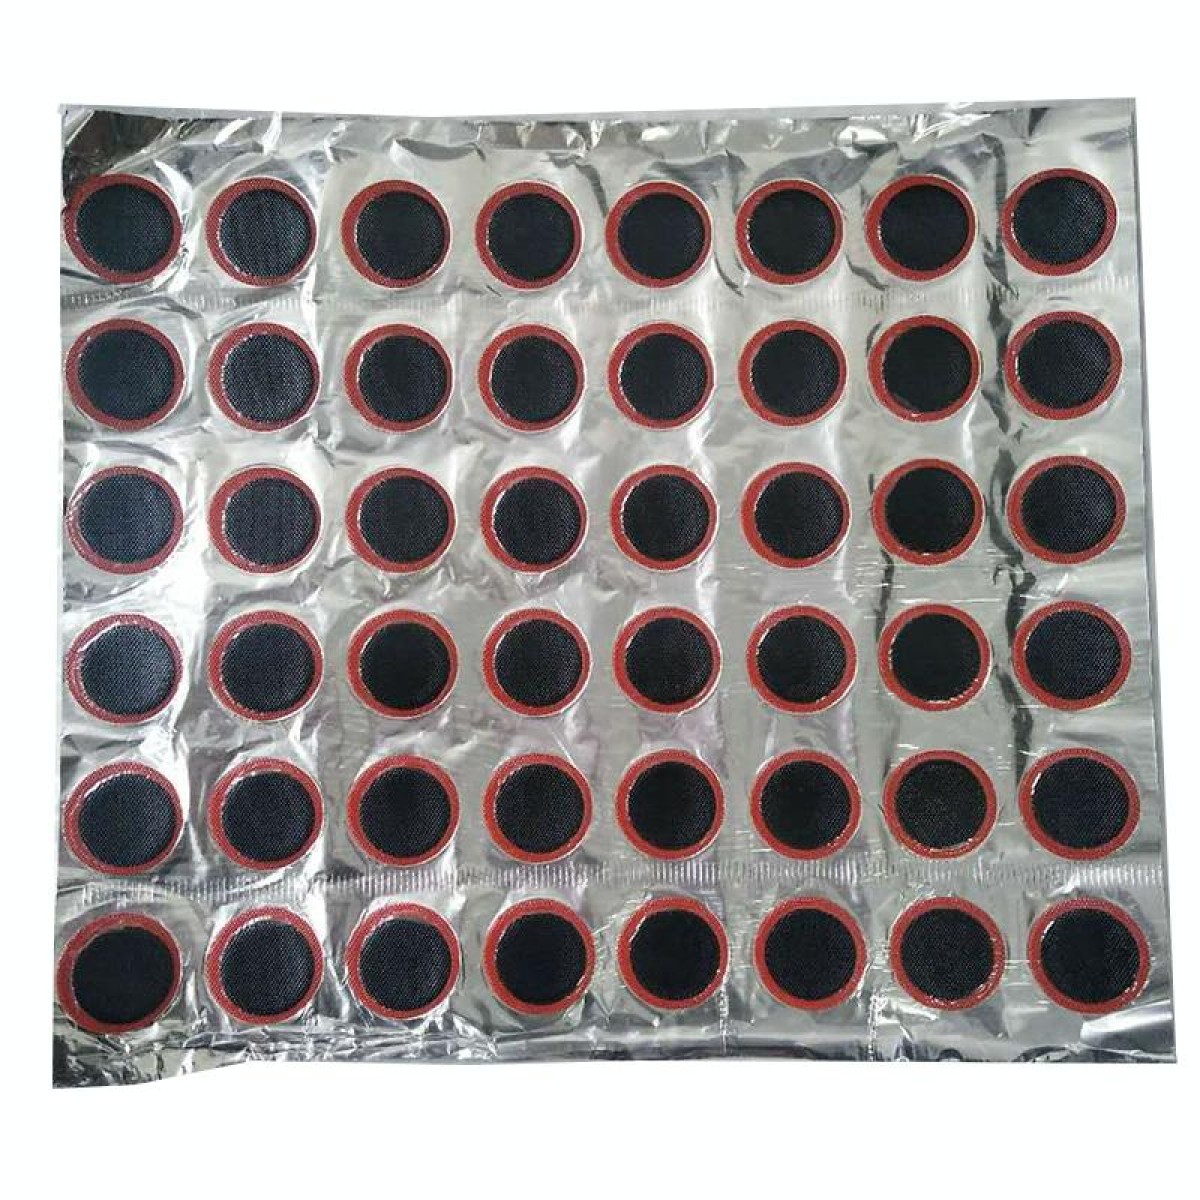 48 Pcs/Set Mountain Bicycle Bike Puncture Maintenance Tire Tyre Rubber Patch Kit Cycling Repairing Tools